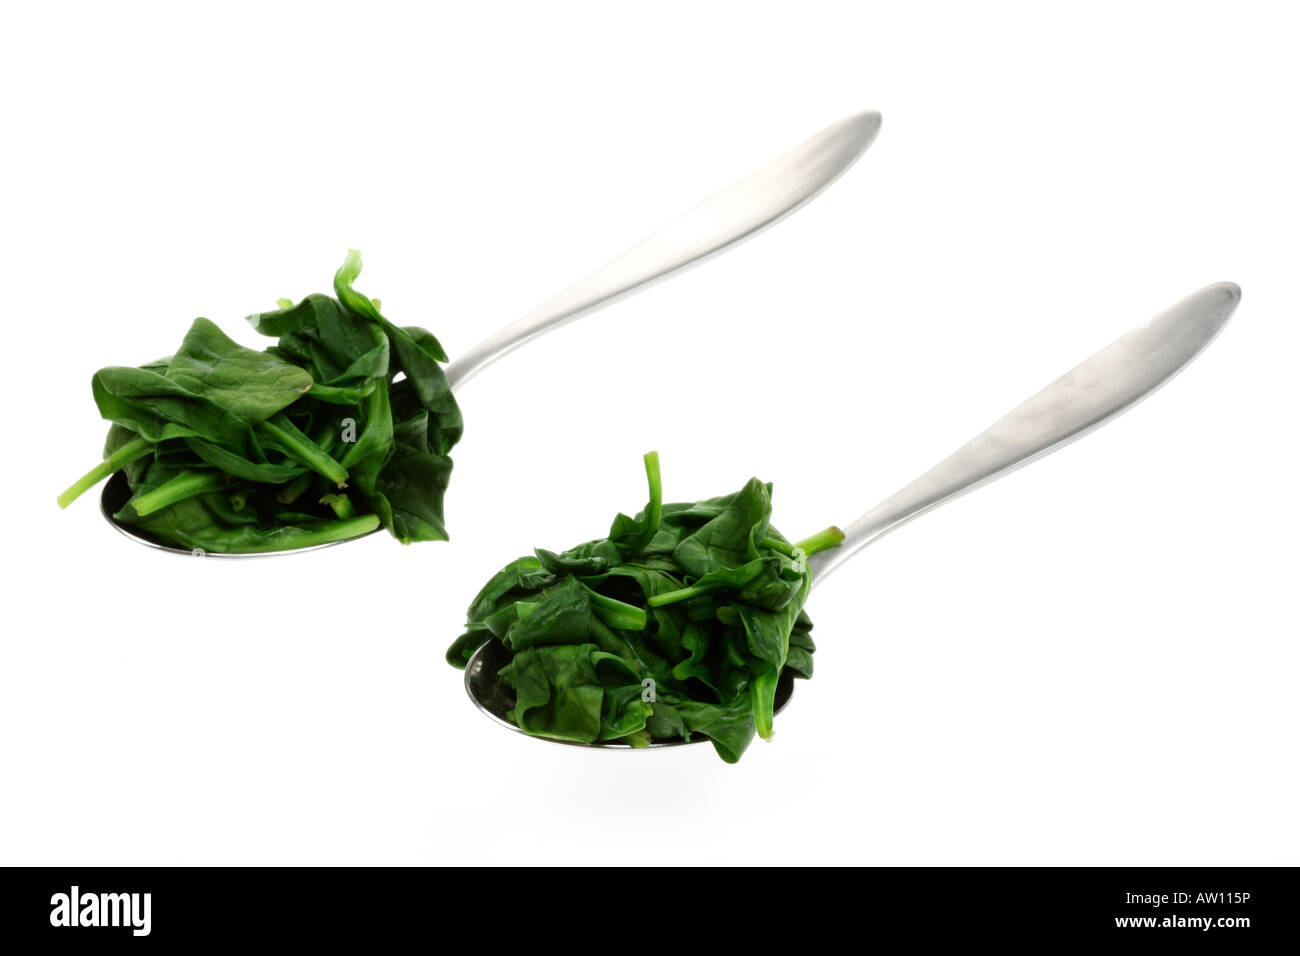 https://c8.alamy.com/comp/AW115P/curly-kale-on-tablespoons-AW115P.jpg